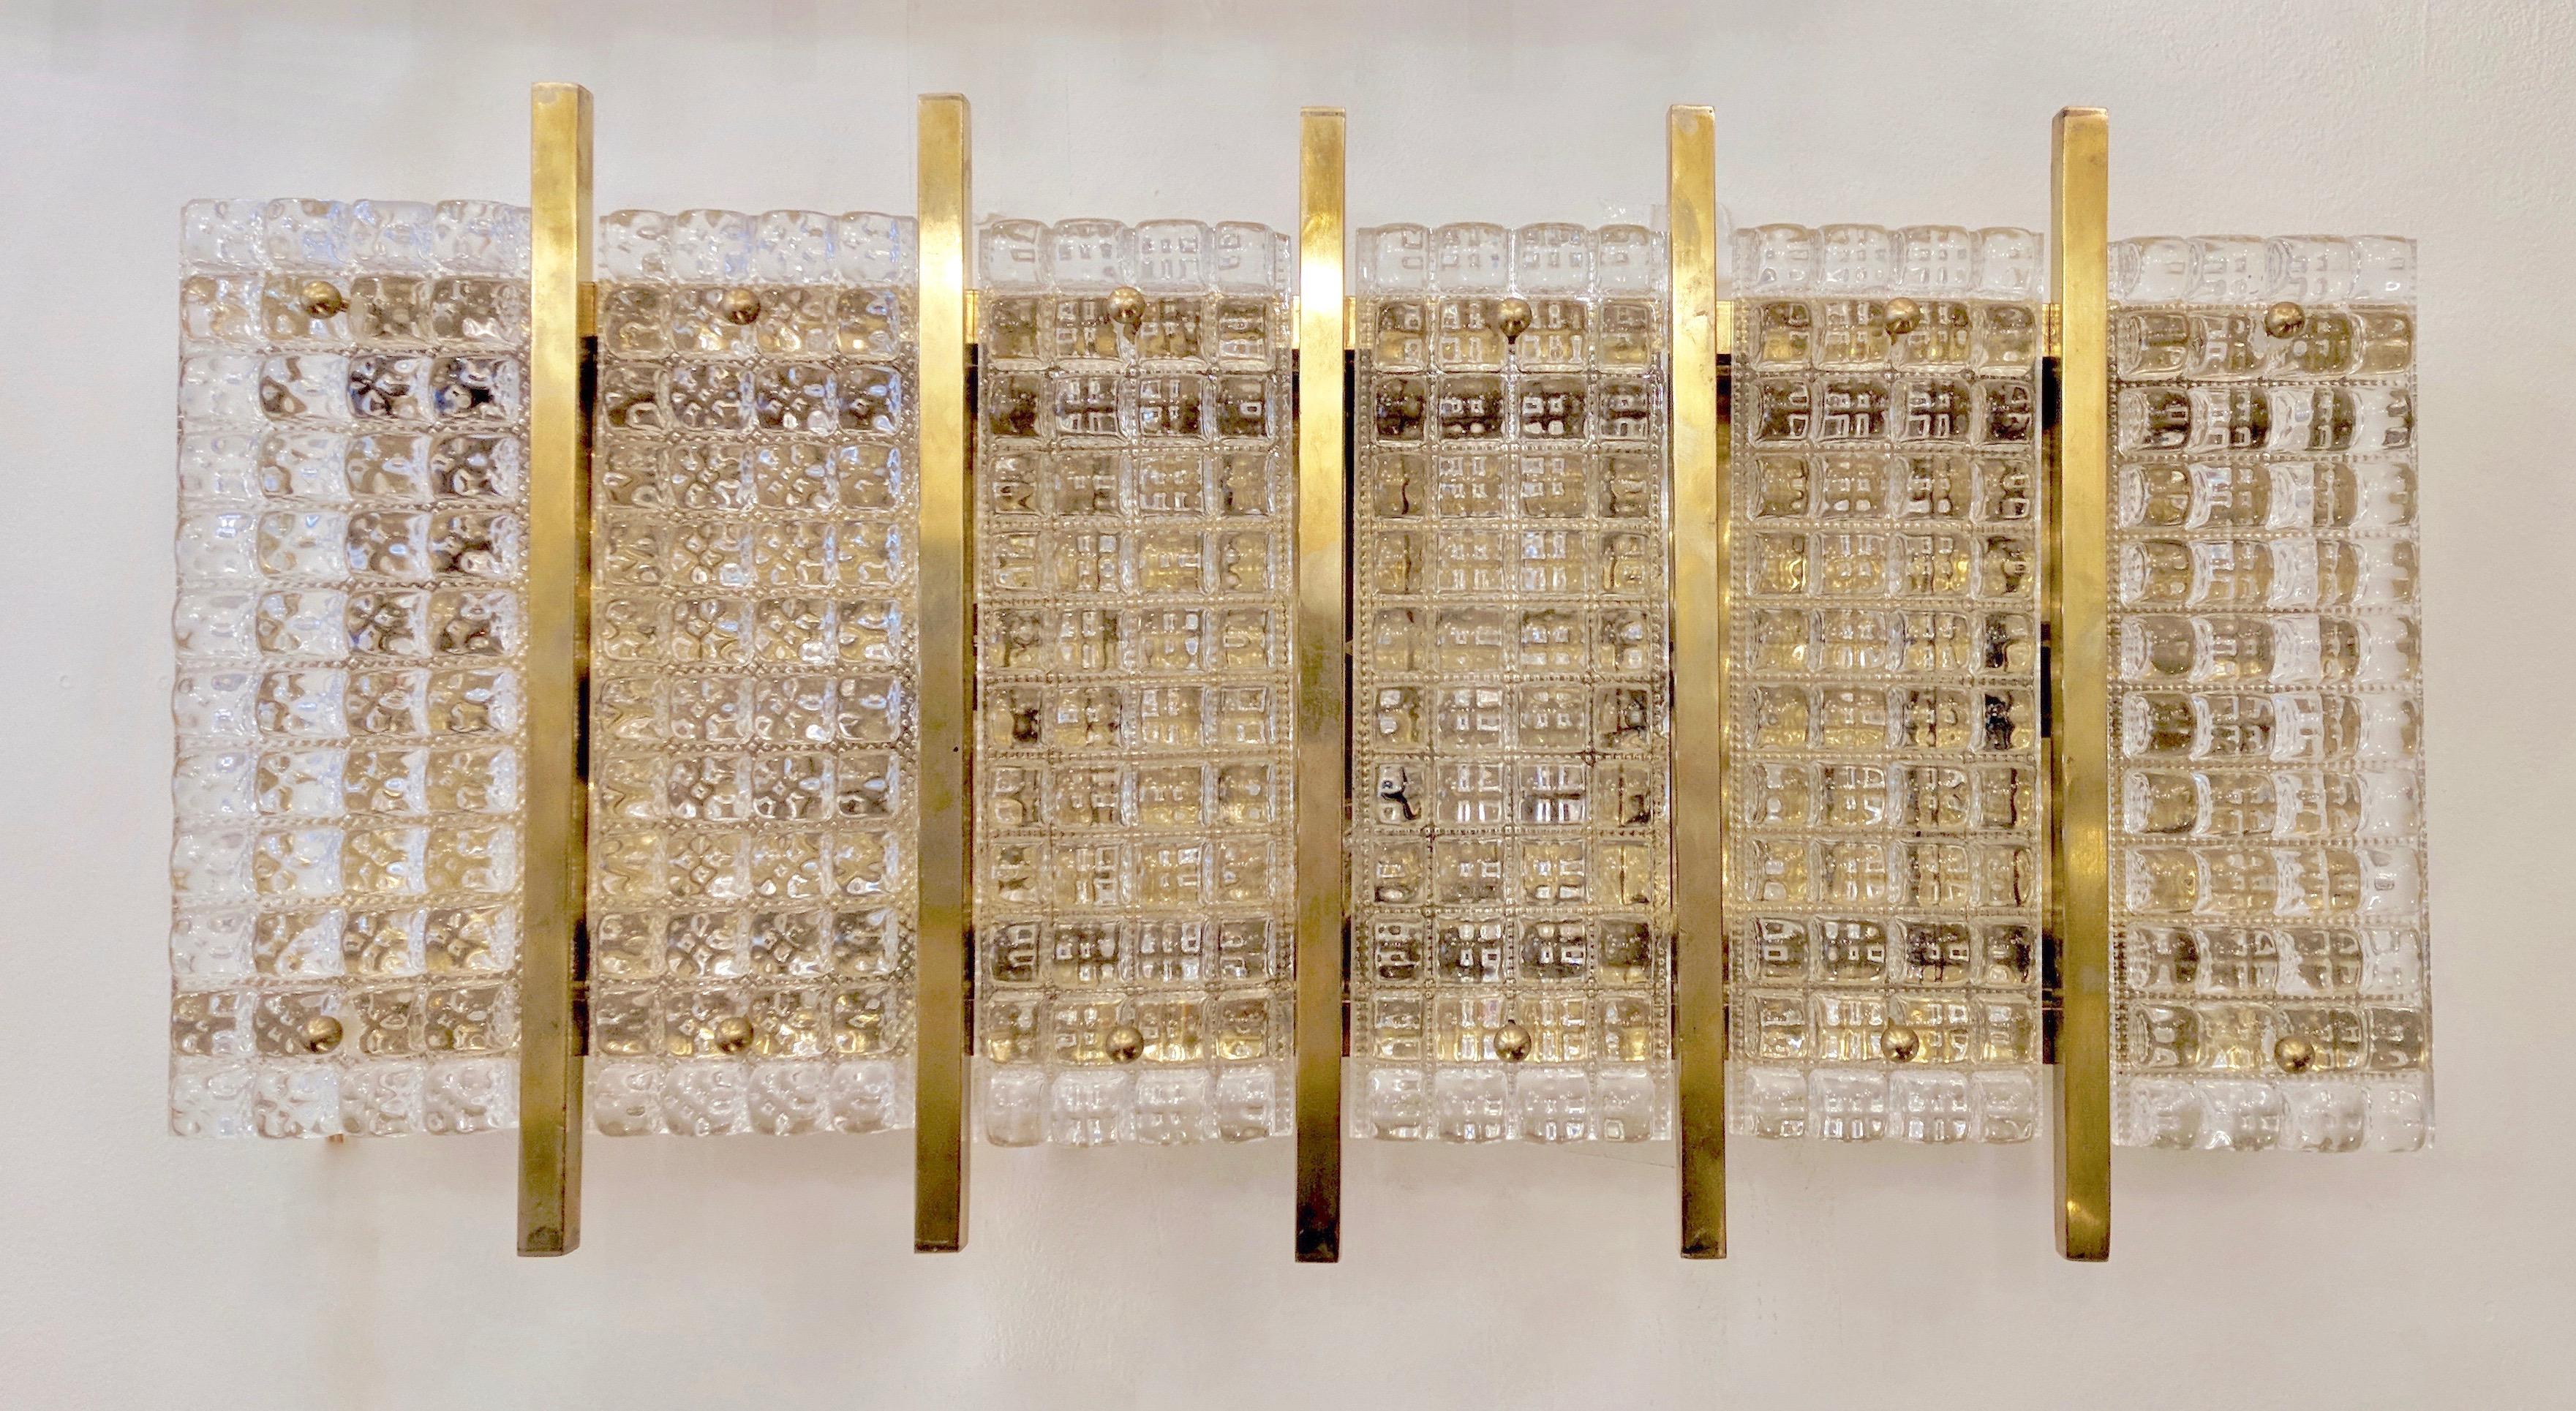 Italian mid-Century modern design wall lights, entirely handmade; 3D textured clear Murano glass molded panels are mounted on a brass support interspersed with solid brass bars to create a unique sleek design. High quality of craftsmanship.
3